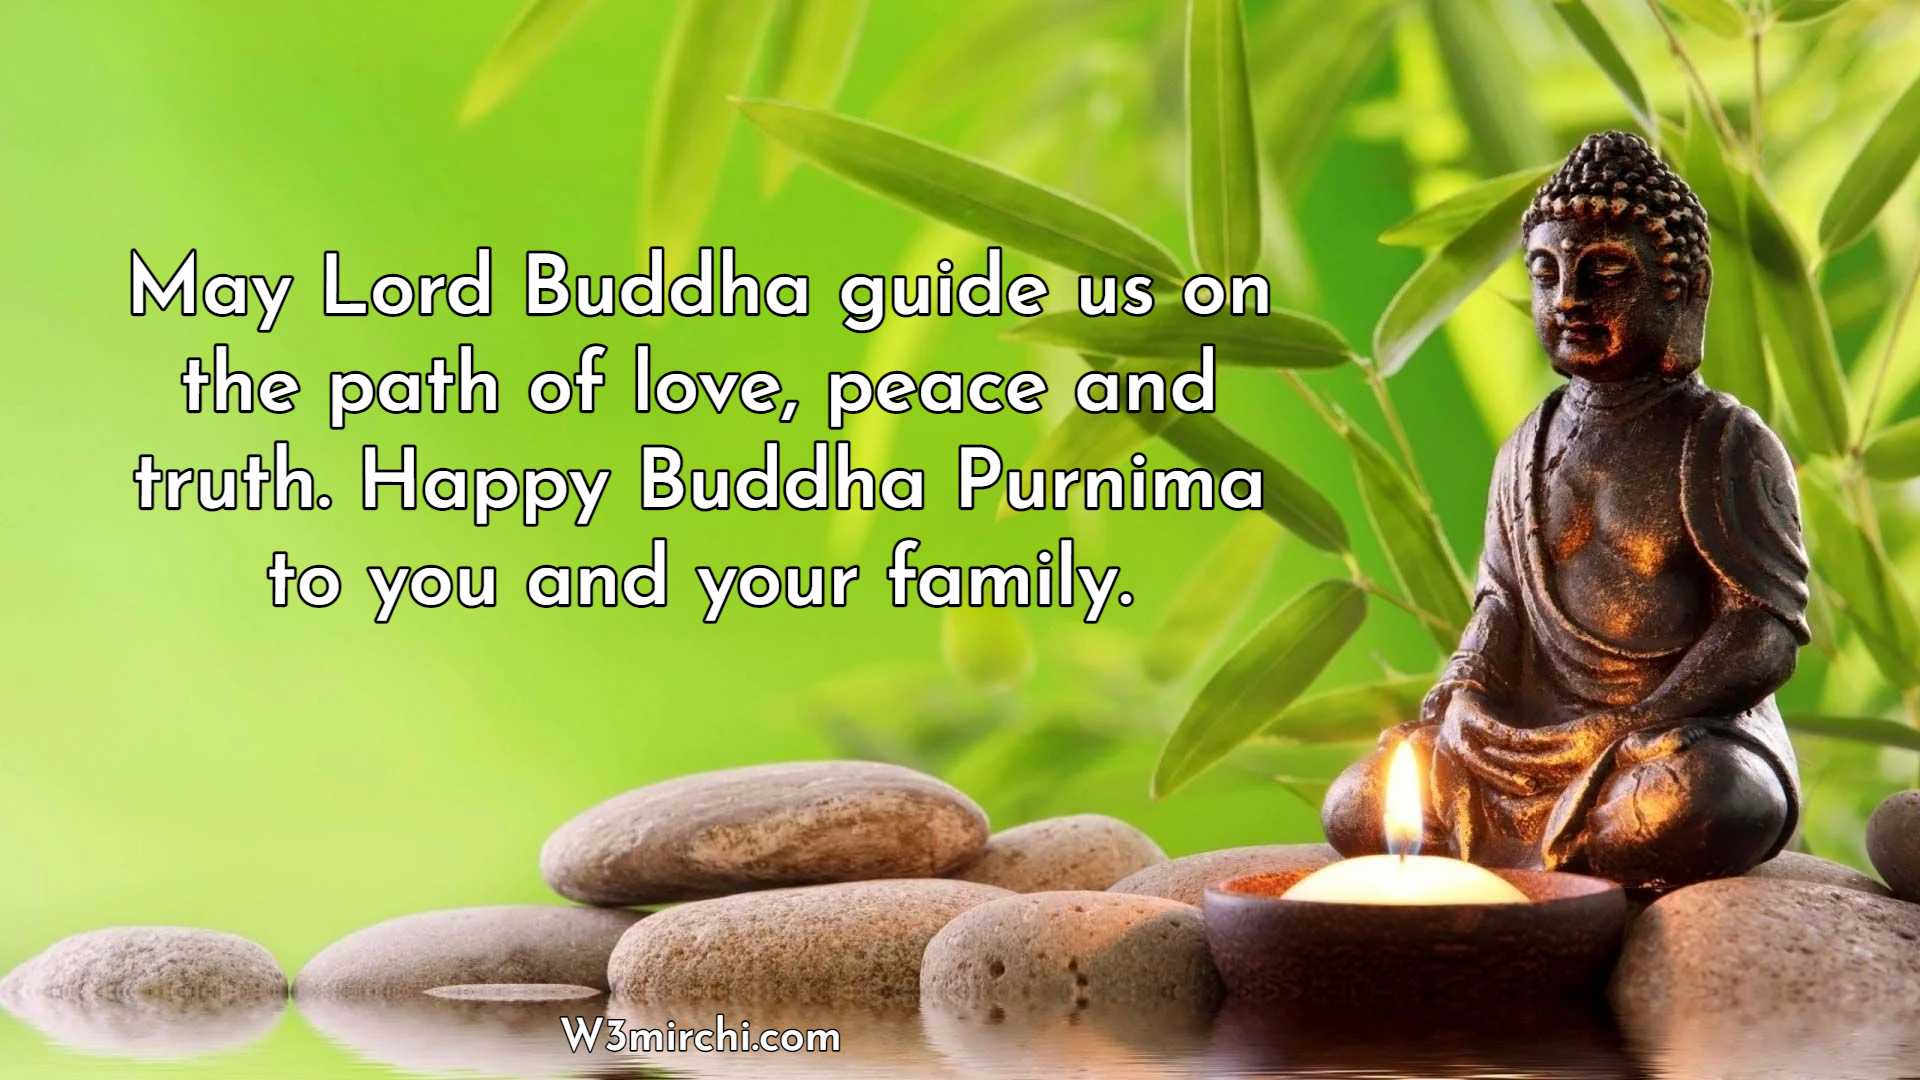 Happy Buddha Purnima to you and your family.